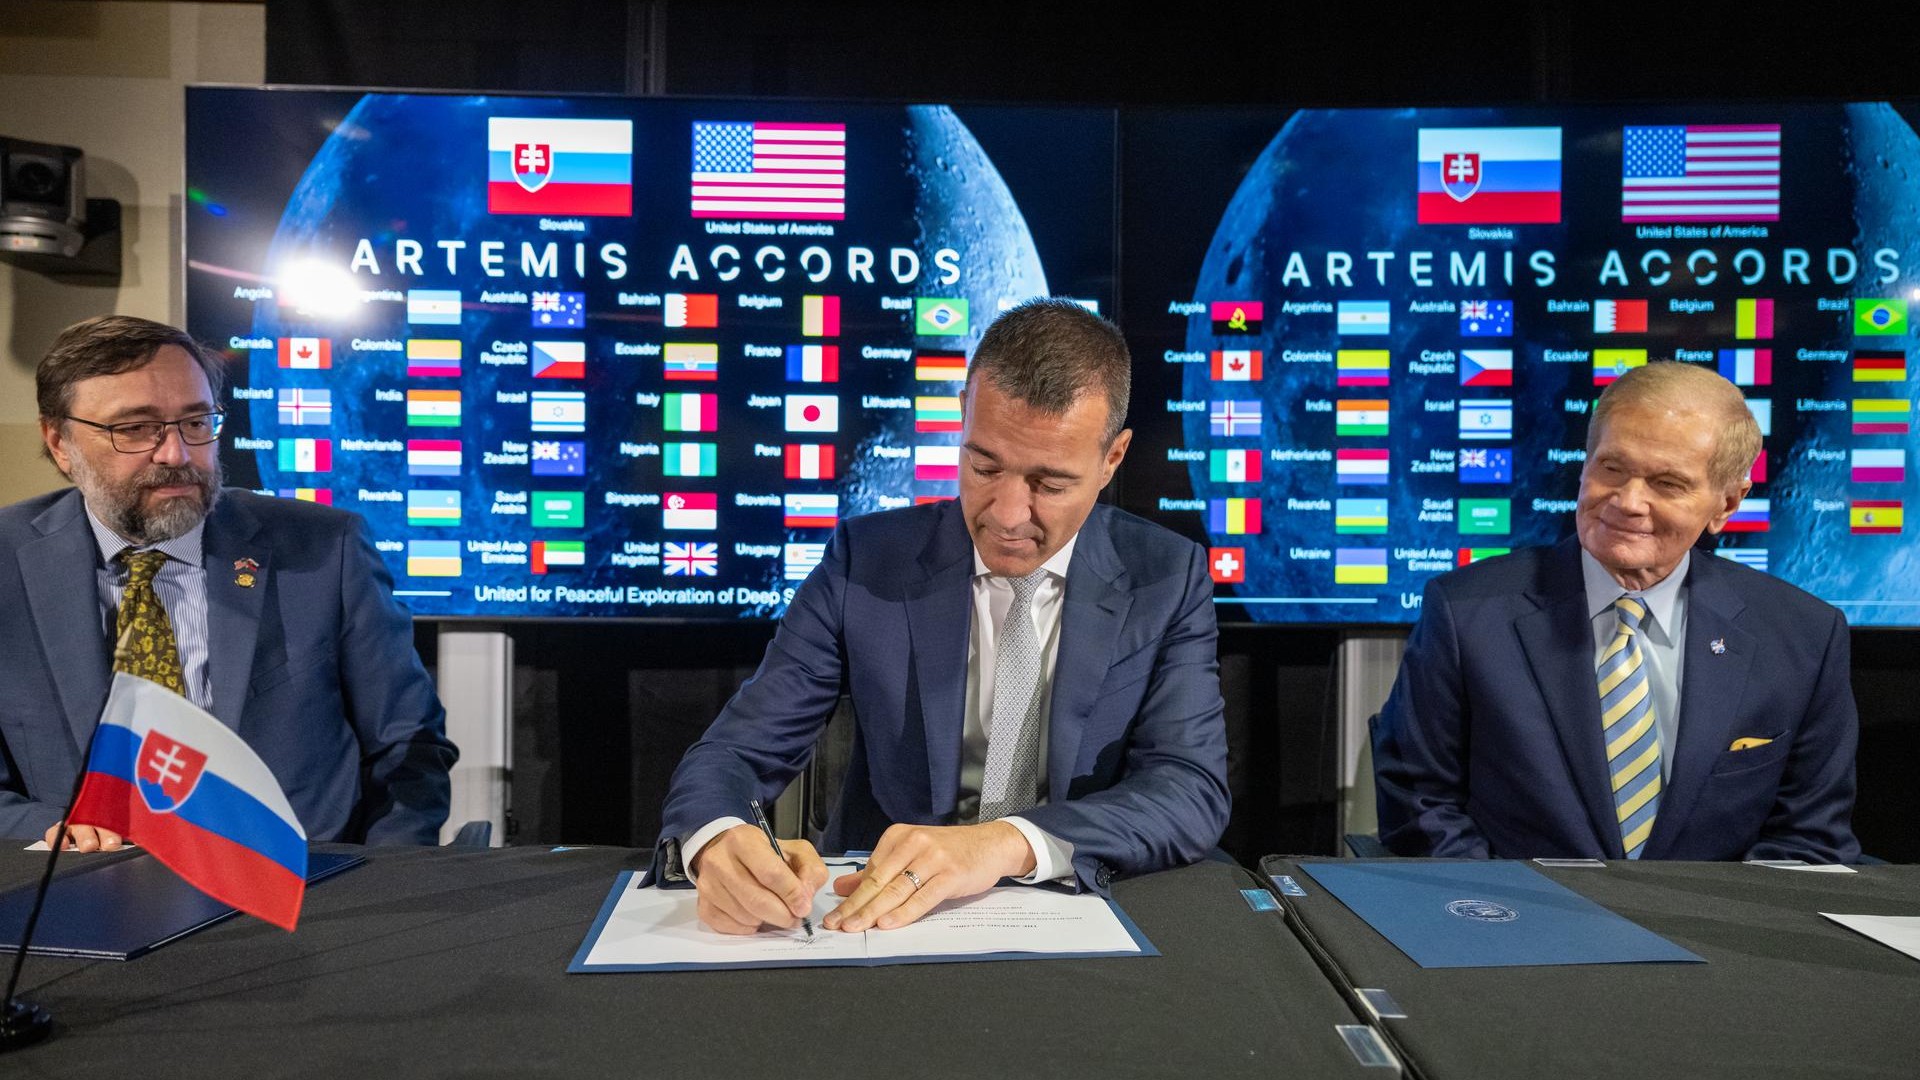 Peru and Slovakia sign the Artemis Accords for peaceful moon exploration Space